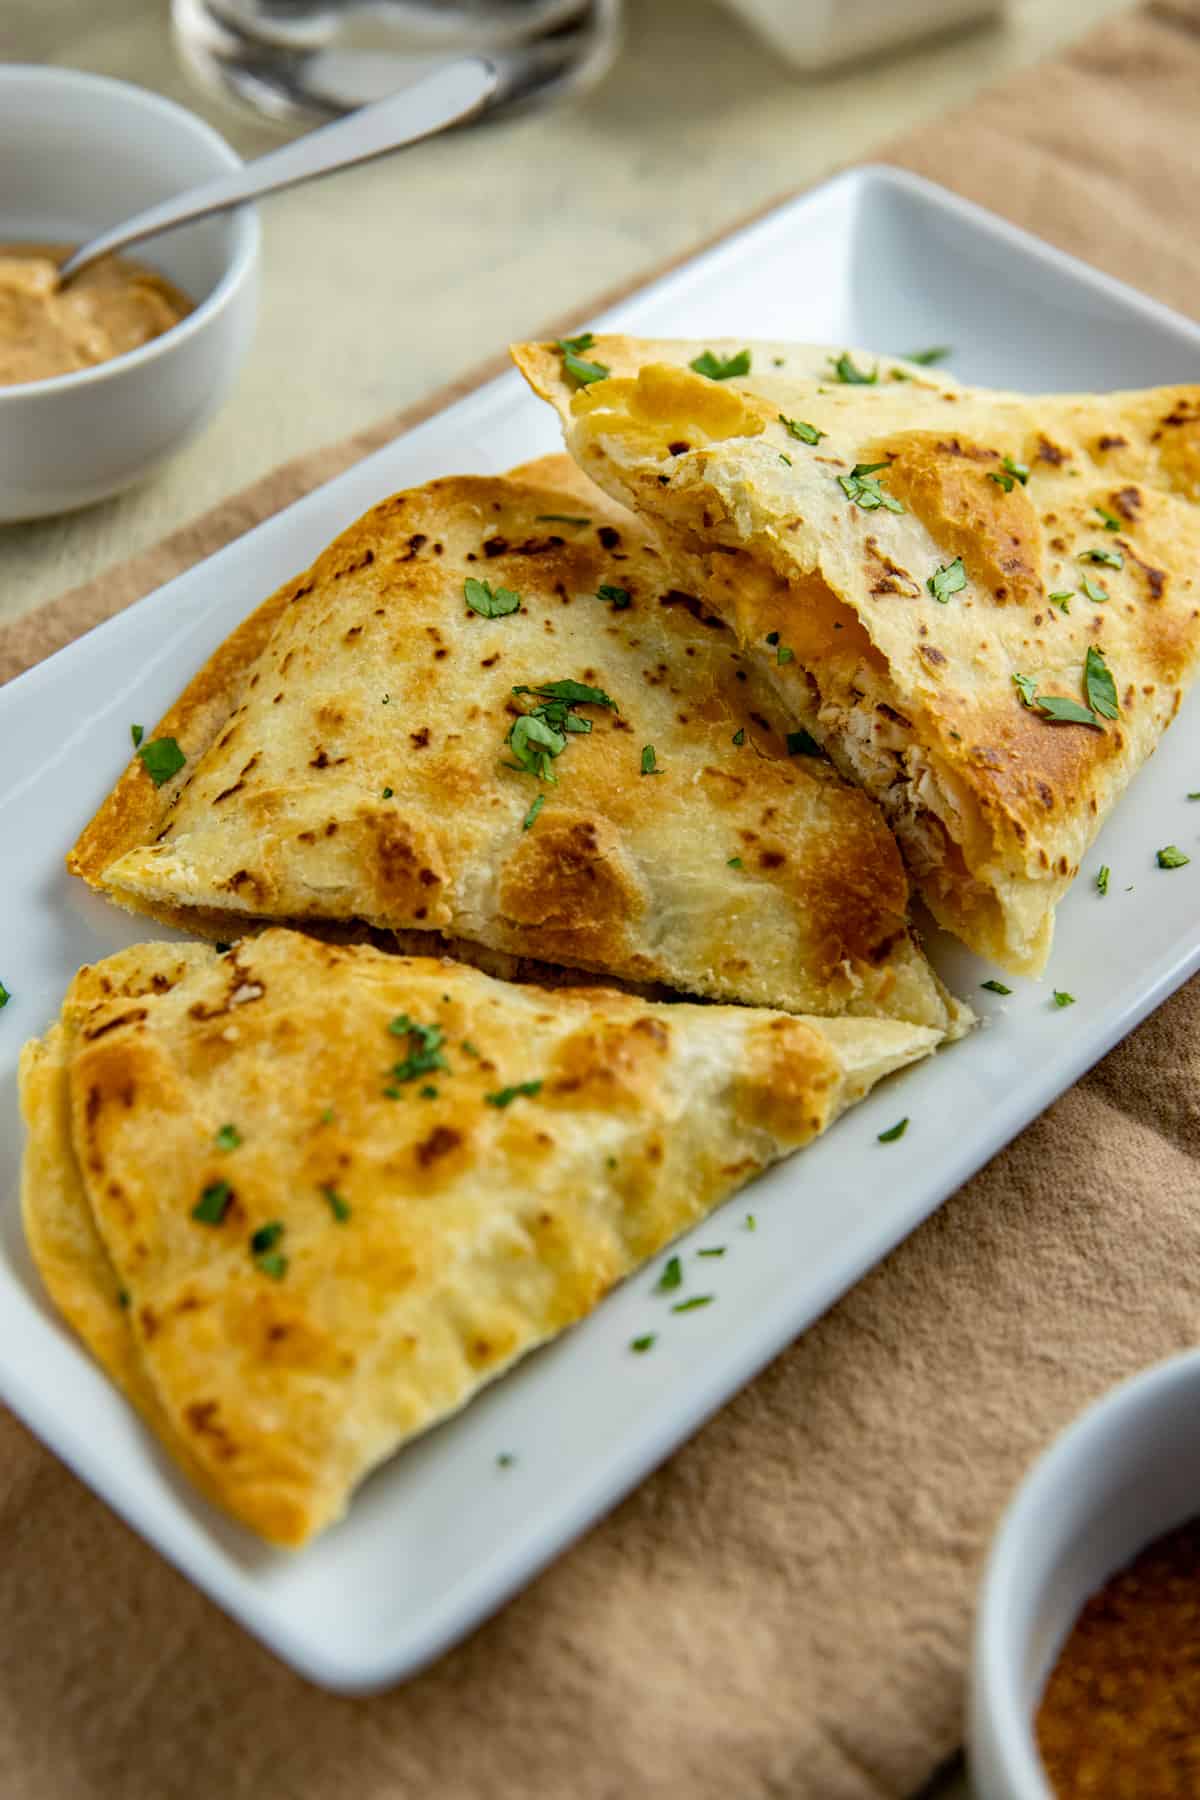 Three quesadillas on white rectangular plate garnished with parsley flakes.